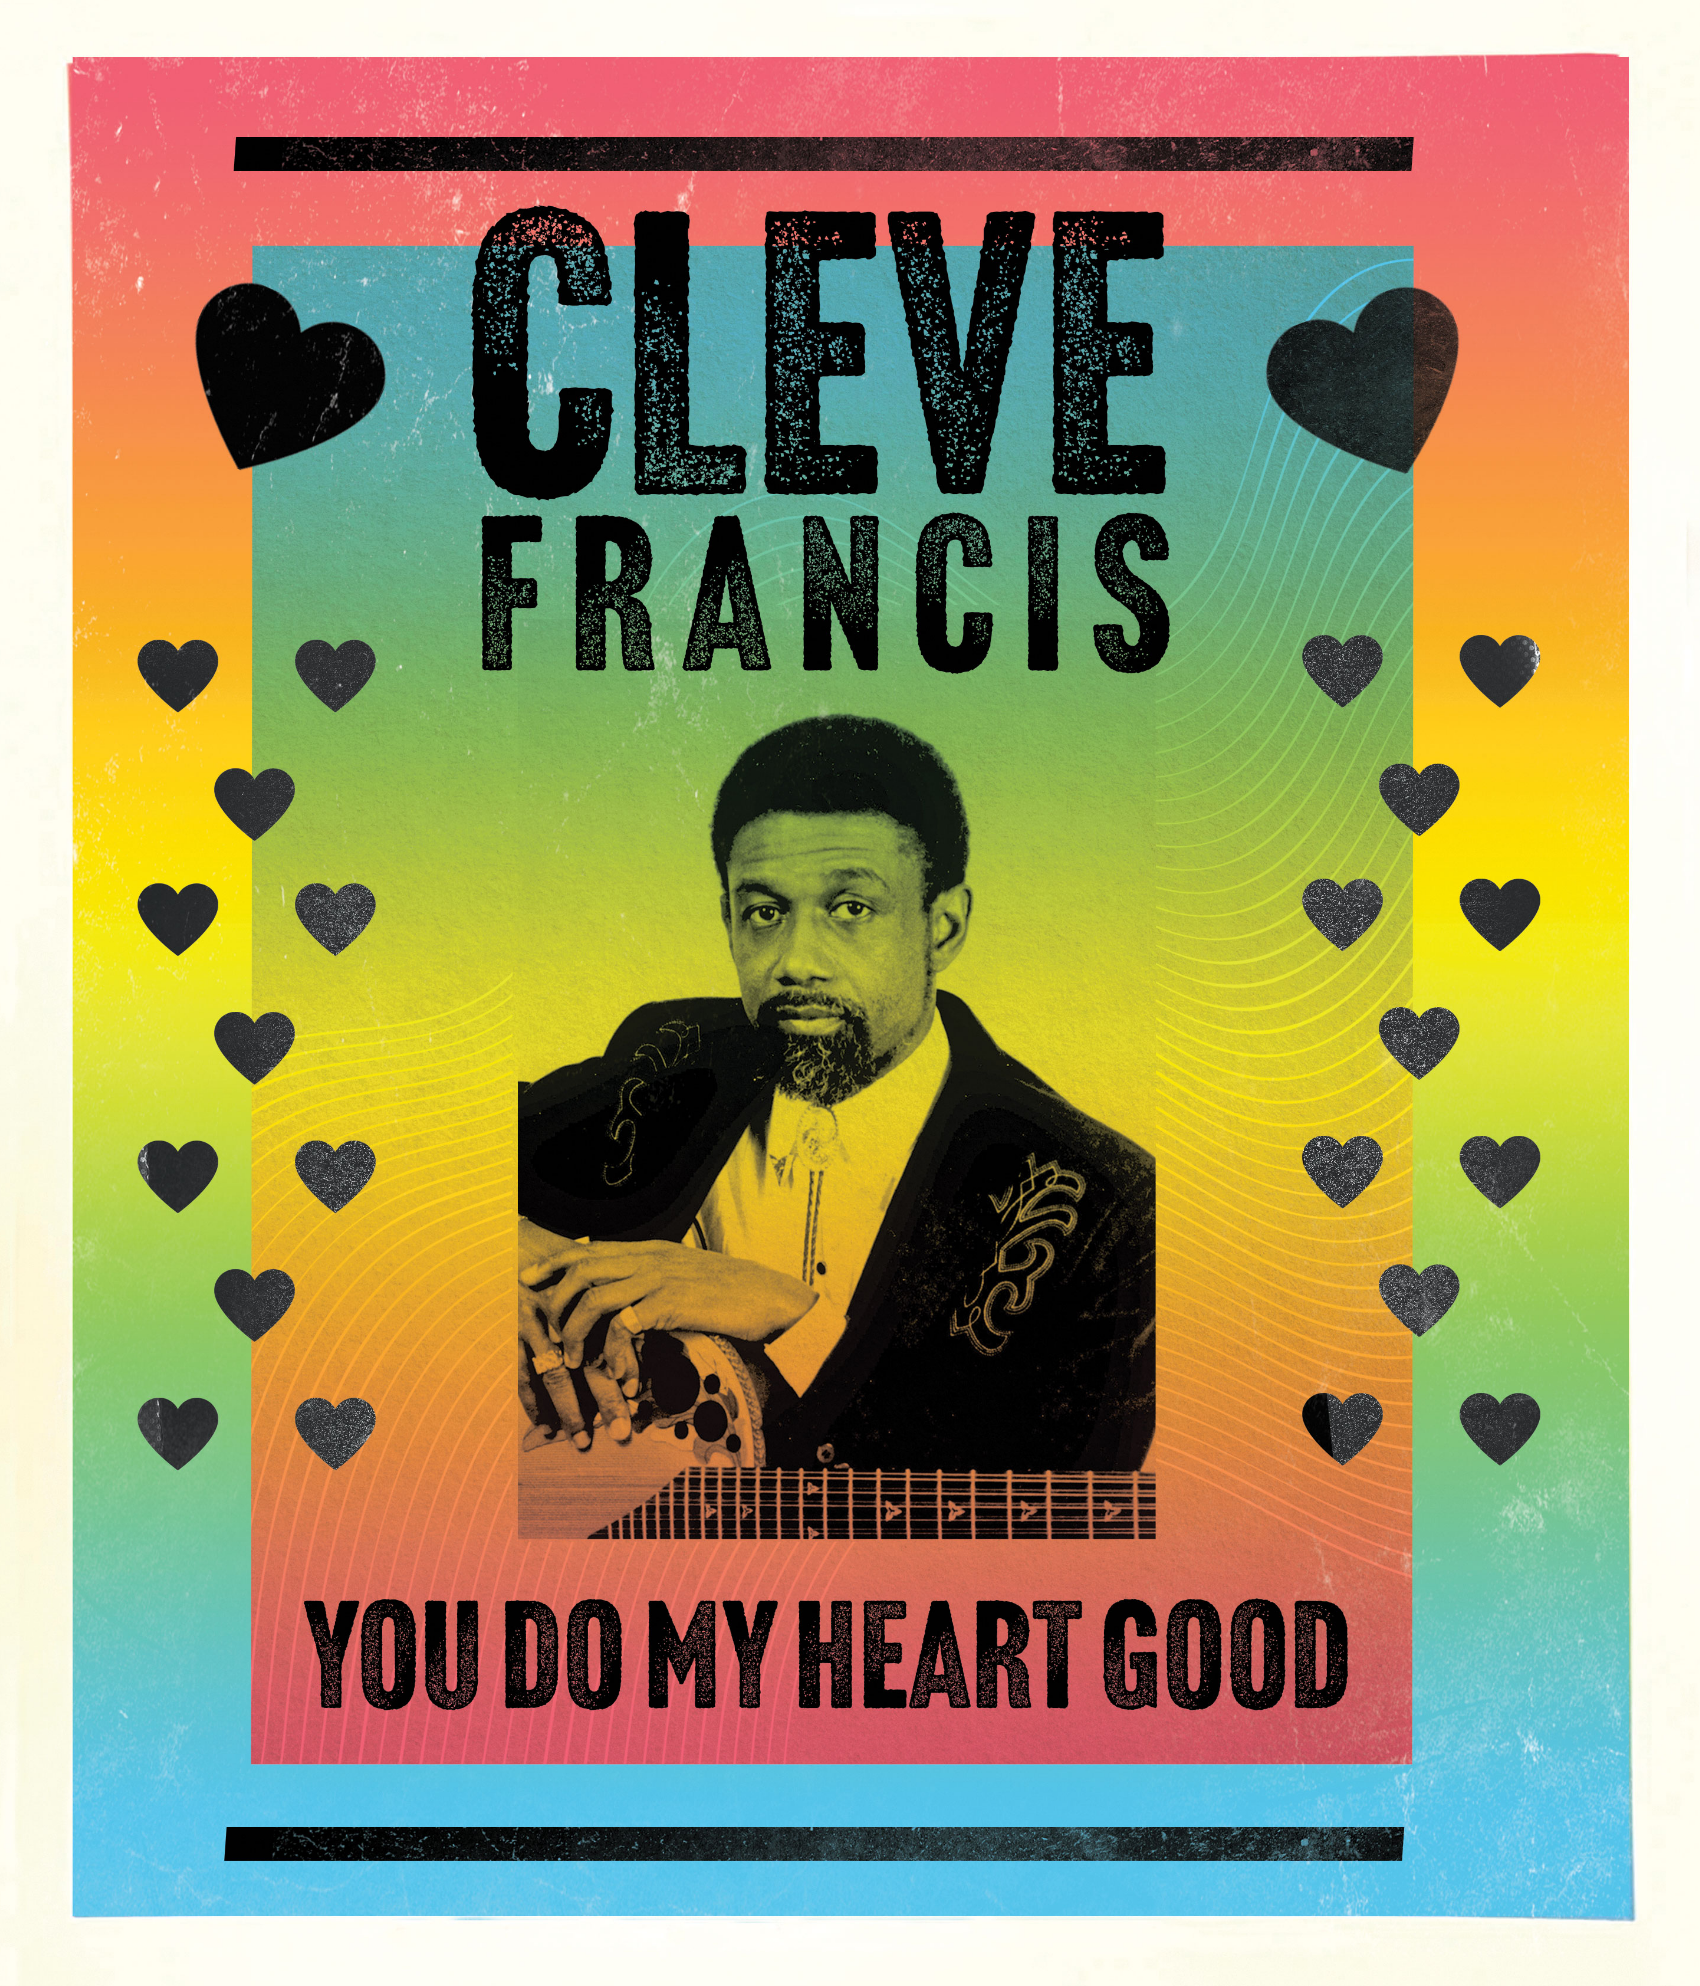 Cleve Francis' "You Do My Heart Good" Album Cover